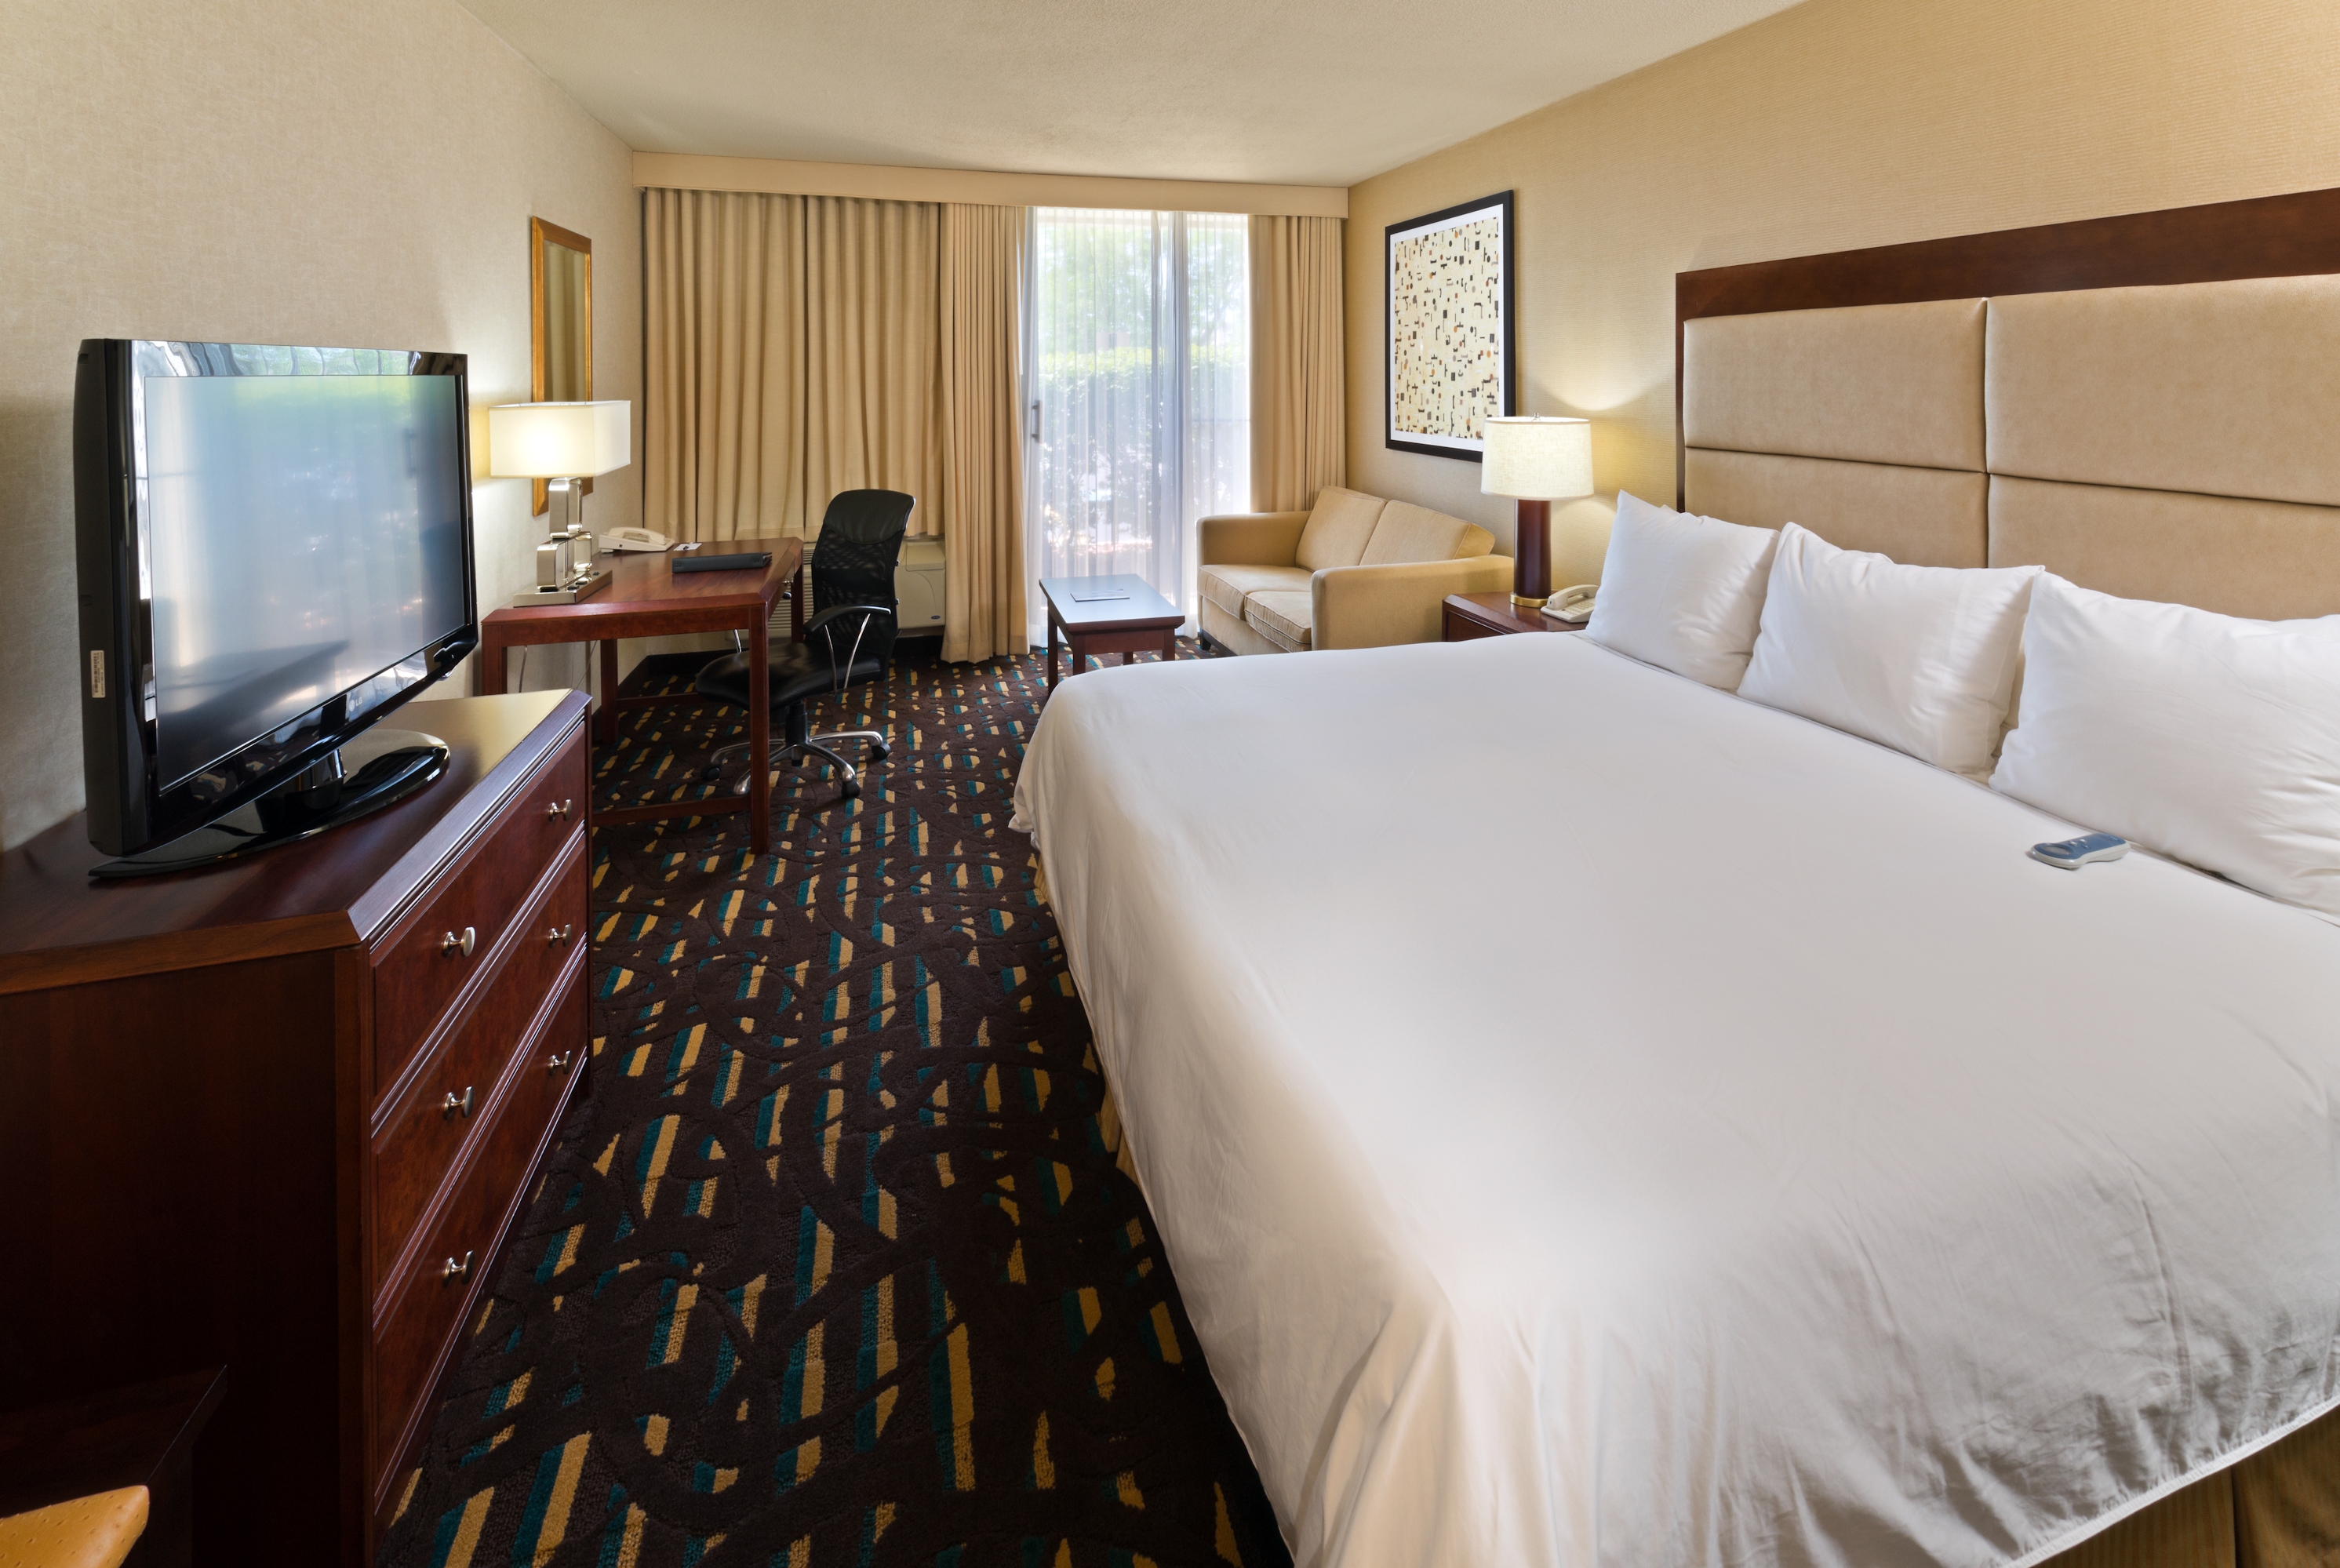 King bed guest room at the Wyndham Chicago O'Hare in Des Plaines, Illinois